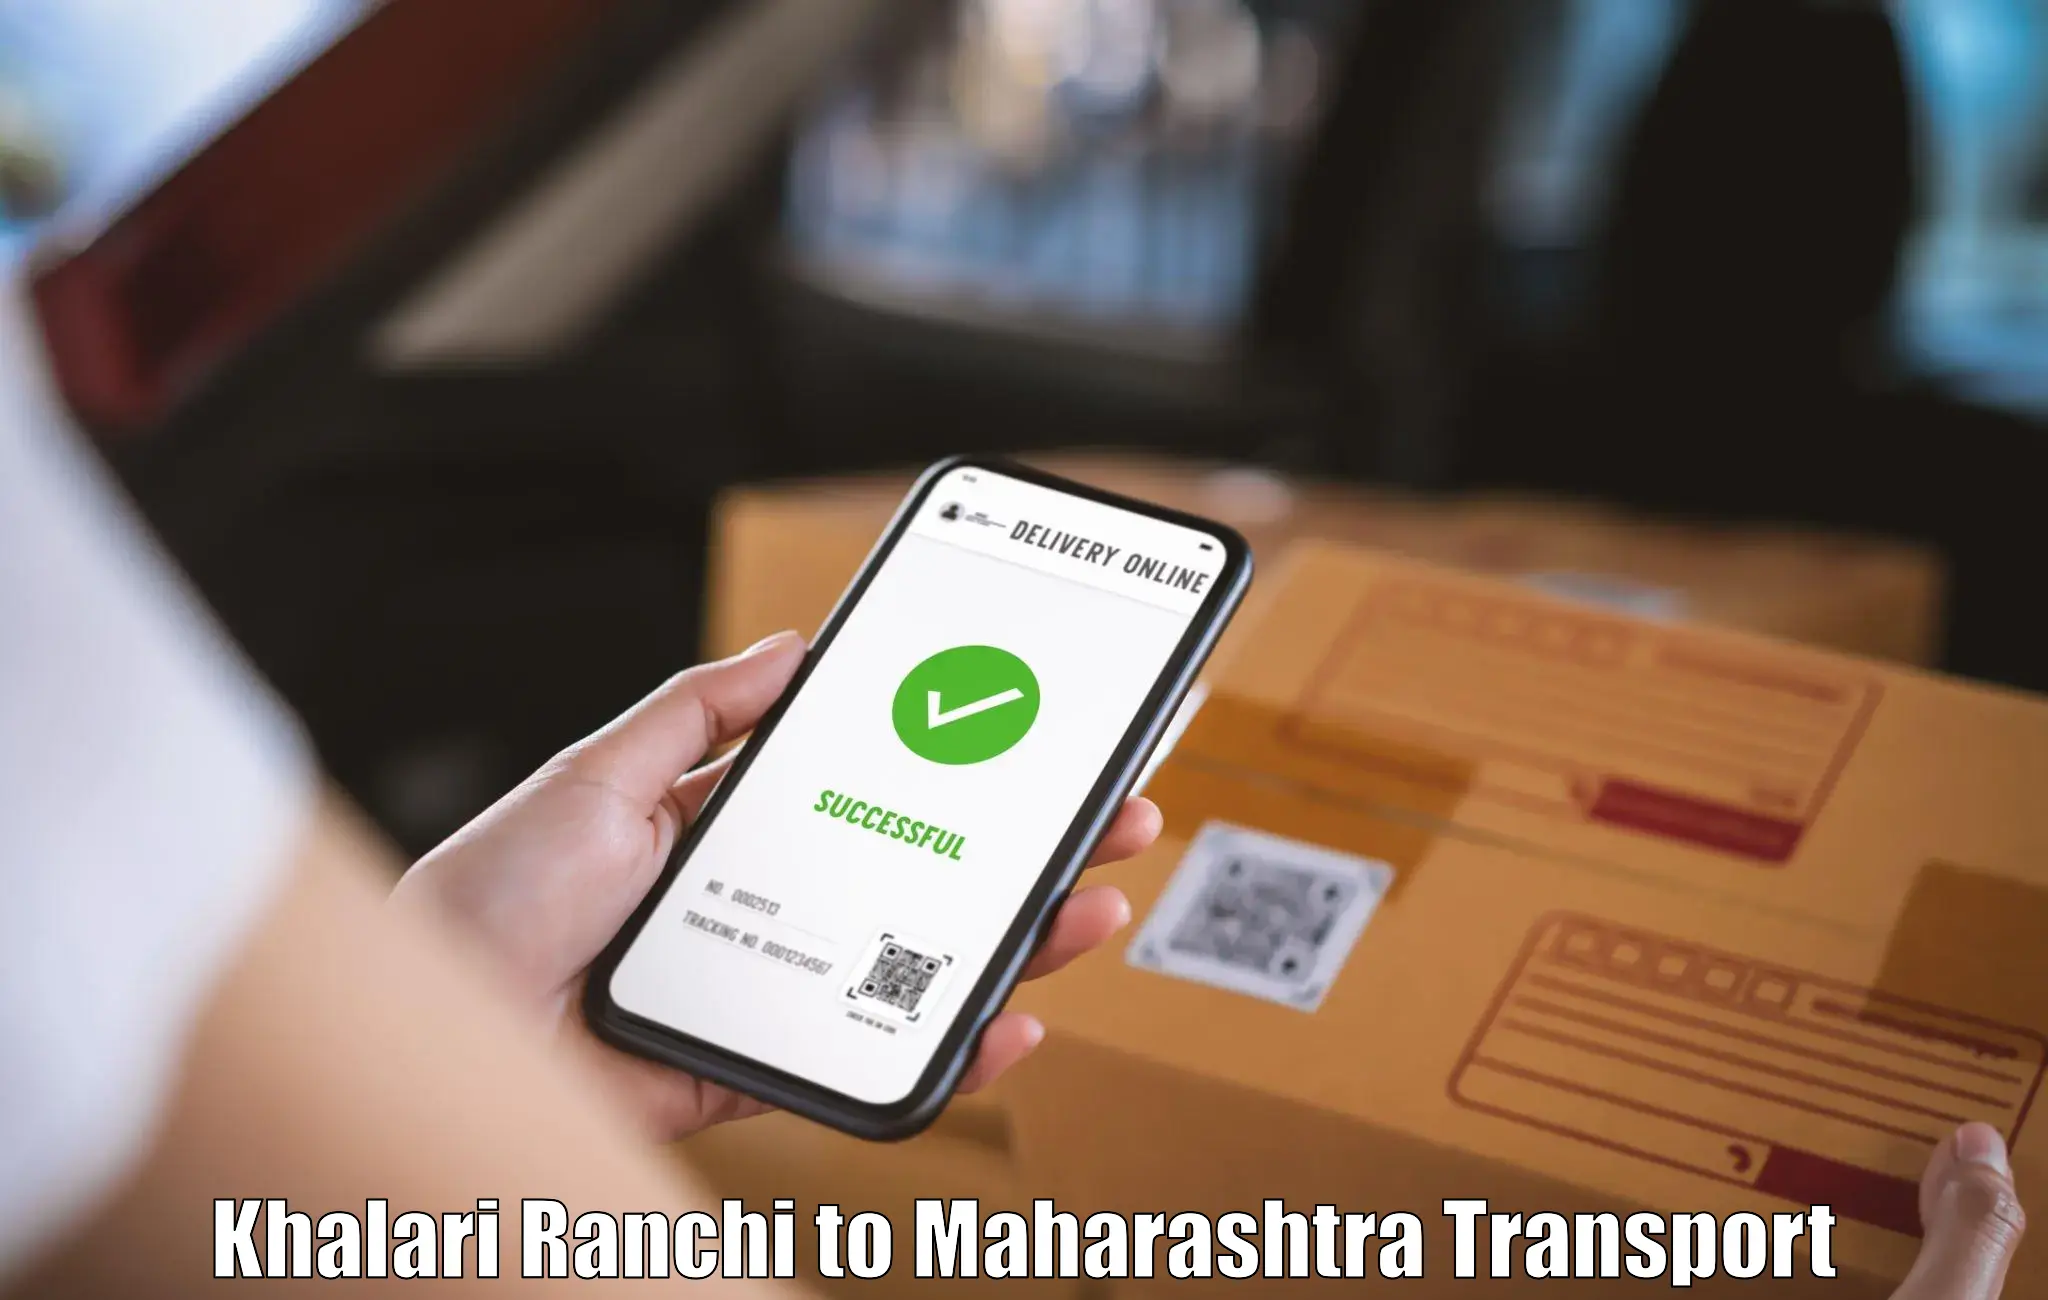 Goods delivery service Khalari Ranchi to Nanded